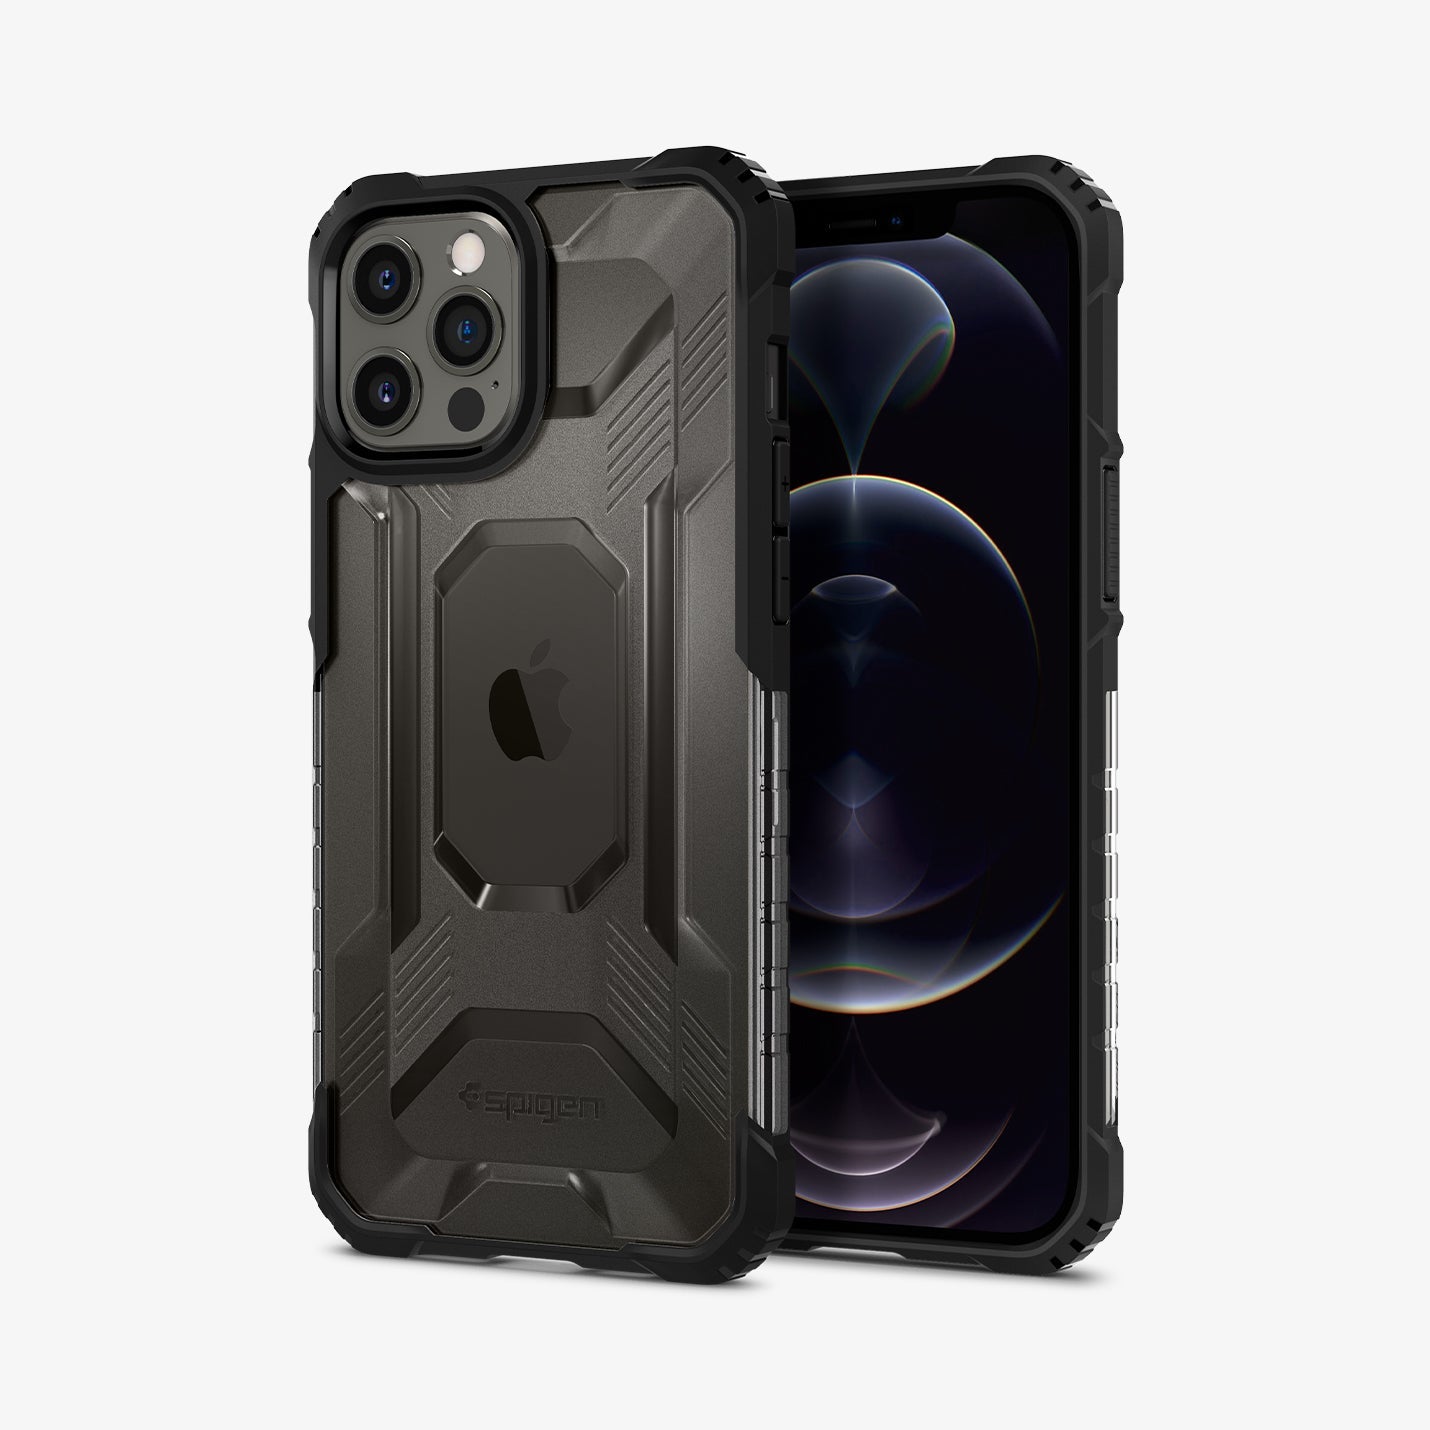 ACS02636 - iPhone 12 Pro Max Case Nitro Force in matte black showing the back and front